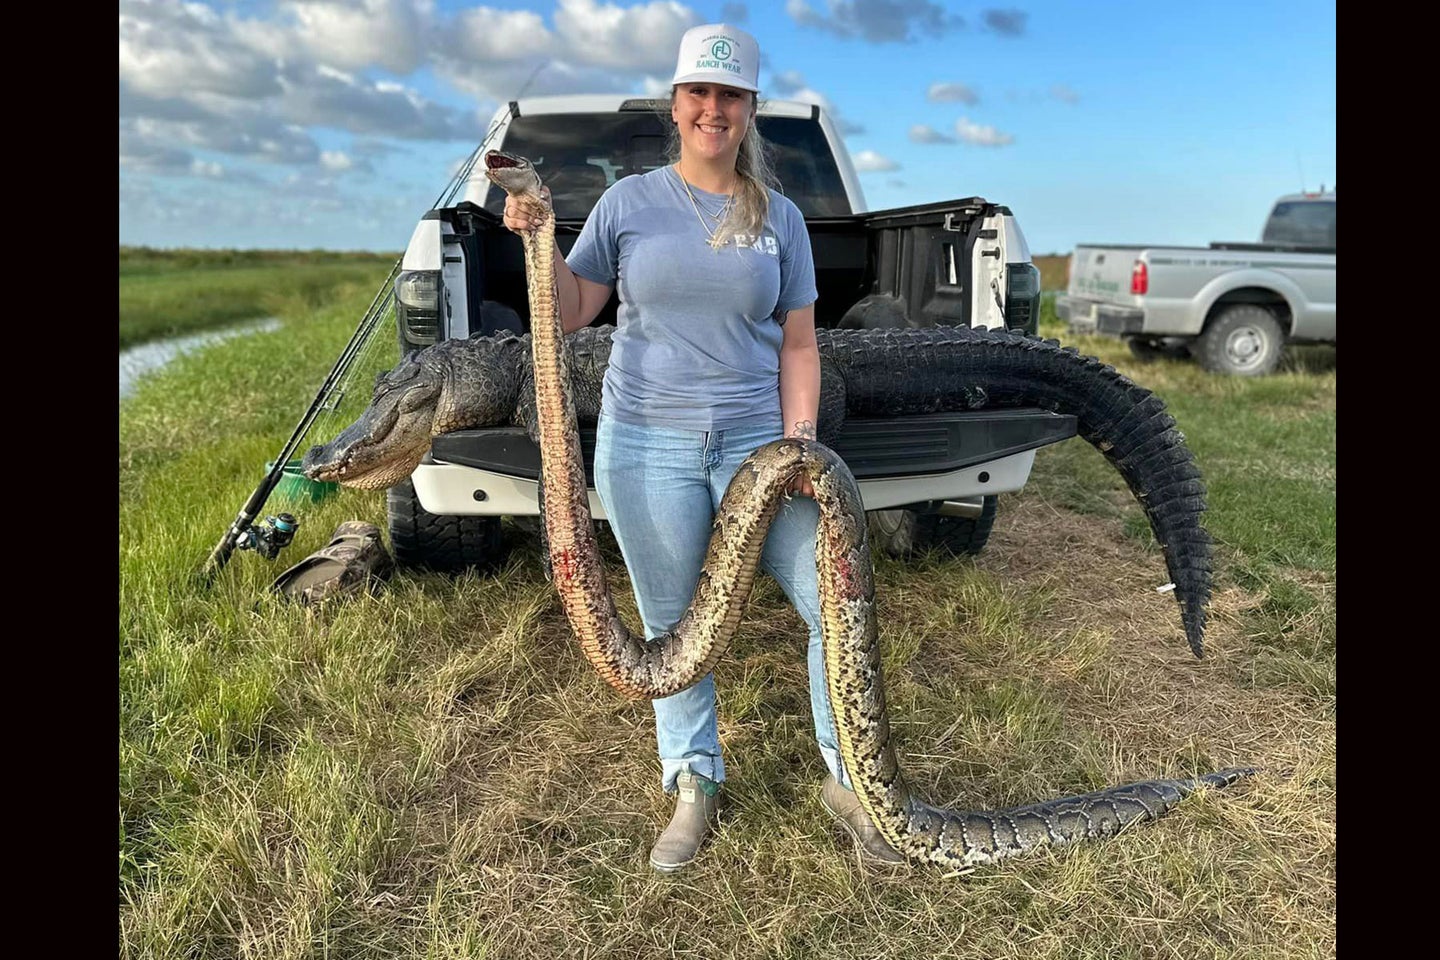 Hunter Kaylee Stillwagon posed with the giant snake in front of a gator tagged the same day. 